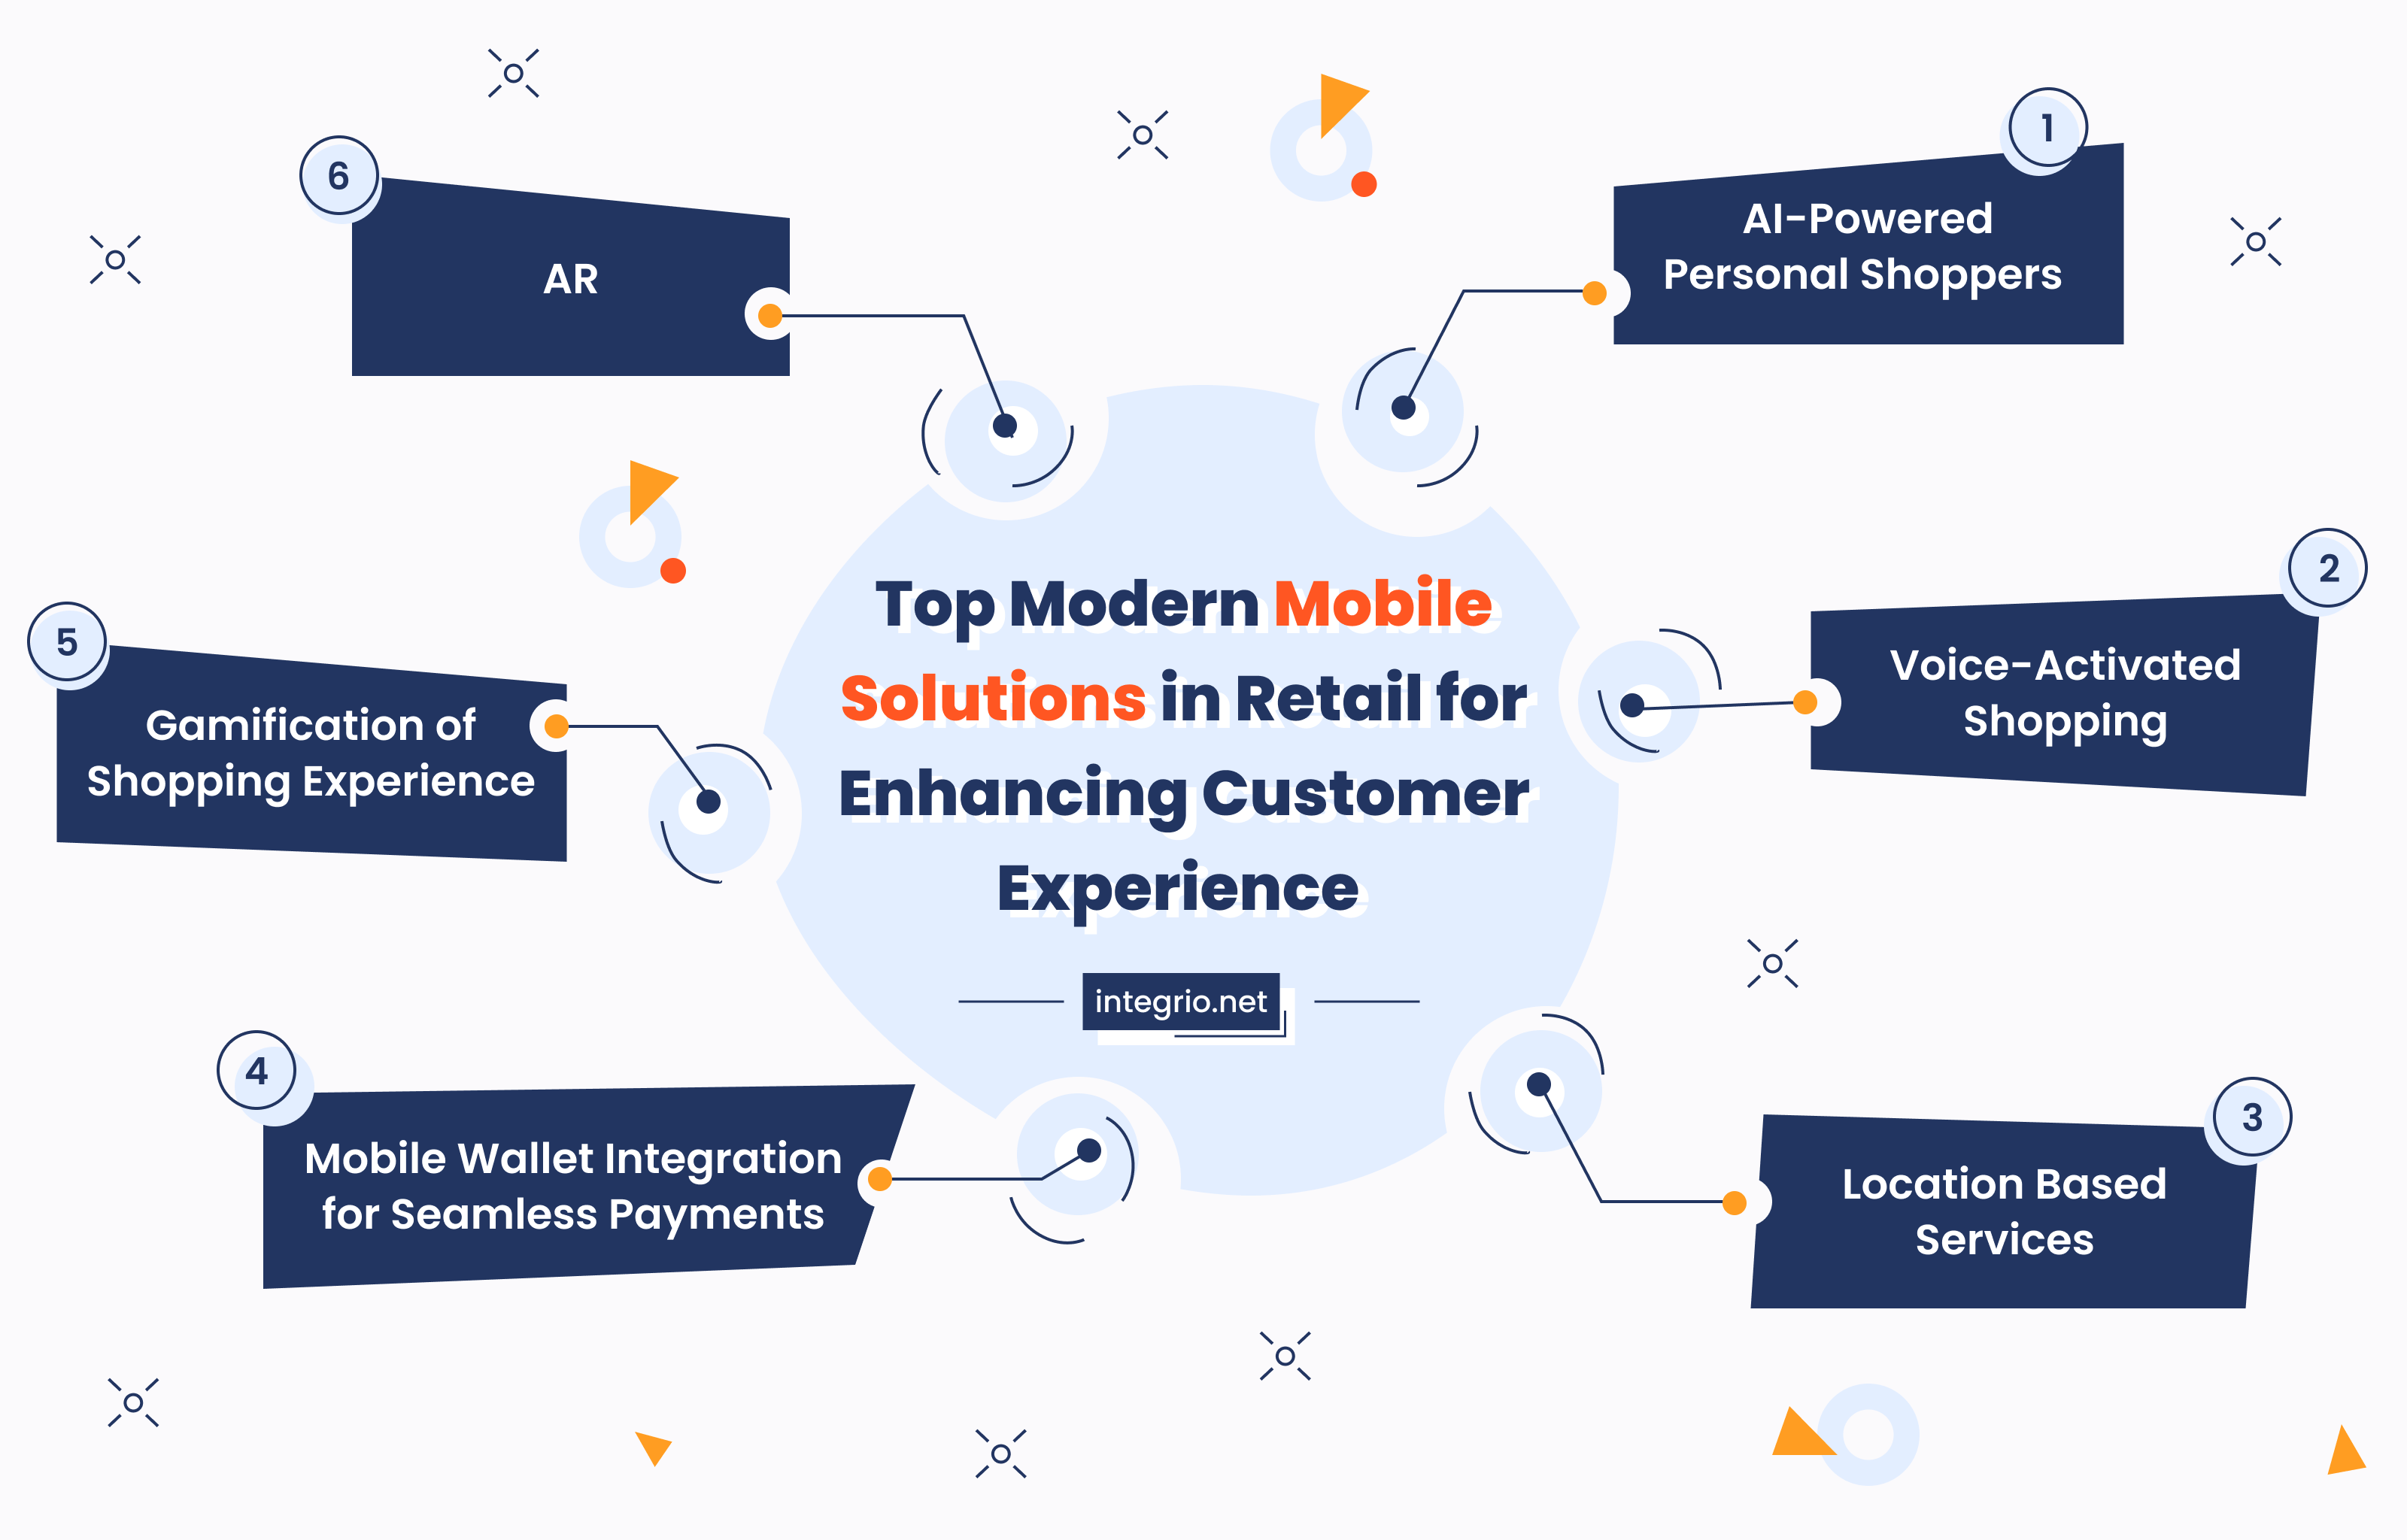 Top Modern Mobile Solutions in Retail for Enhancing Customer Experience